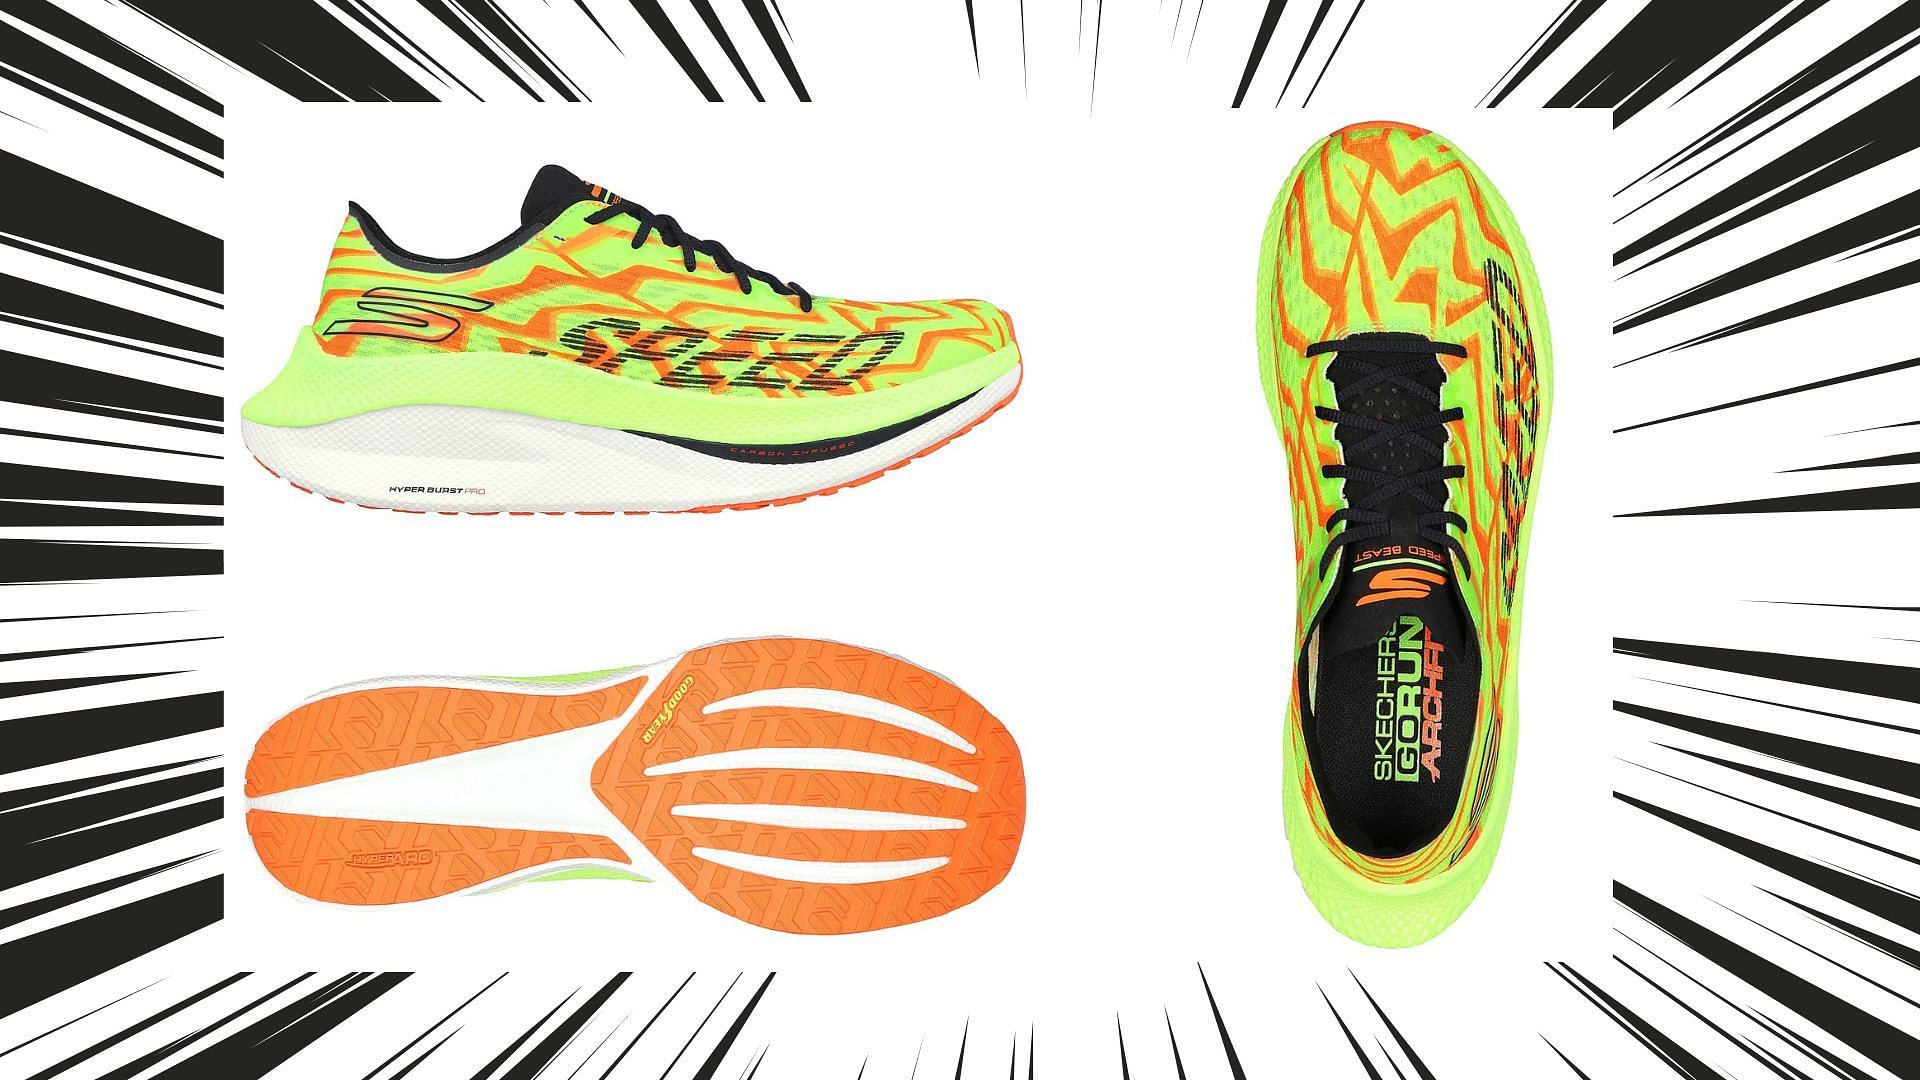 Skechers GO RUN Speed Beast shoes can be a perfect choice for marathon runners